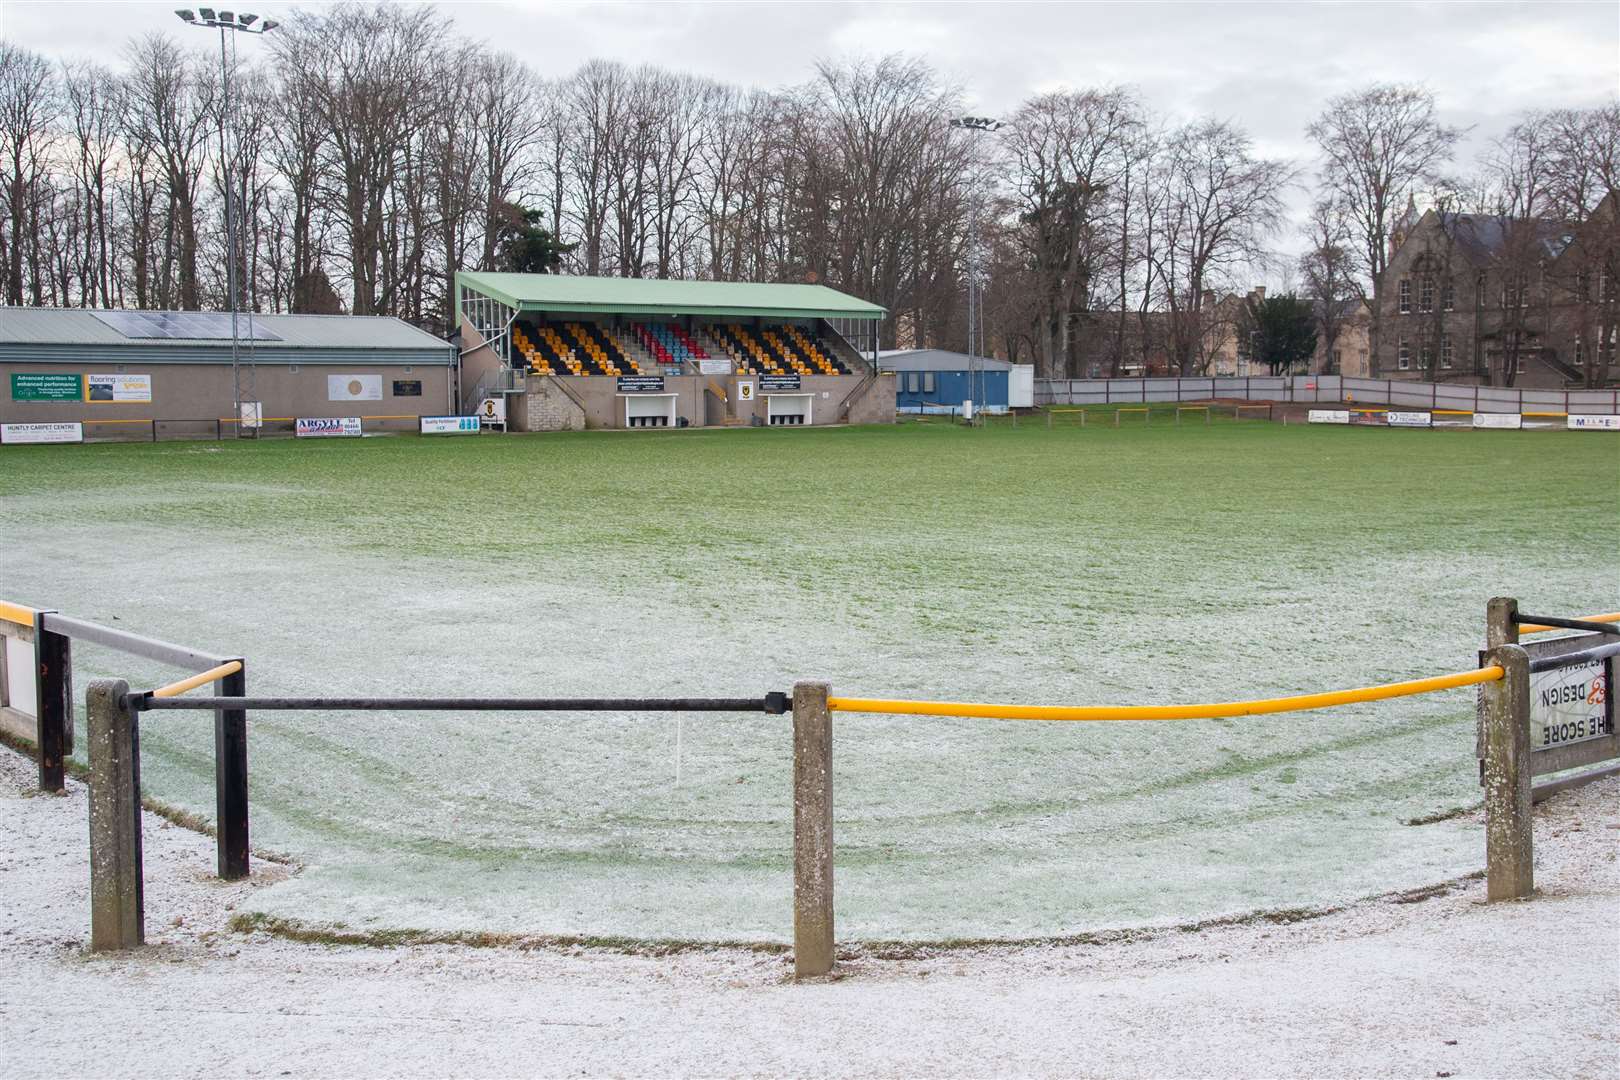 Pitch inspections are planned across the north.